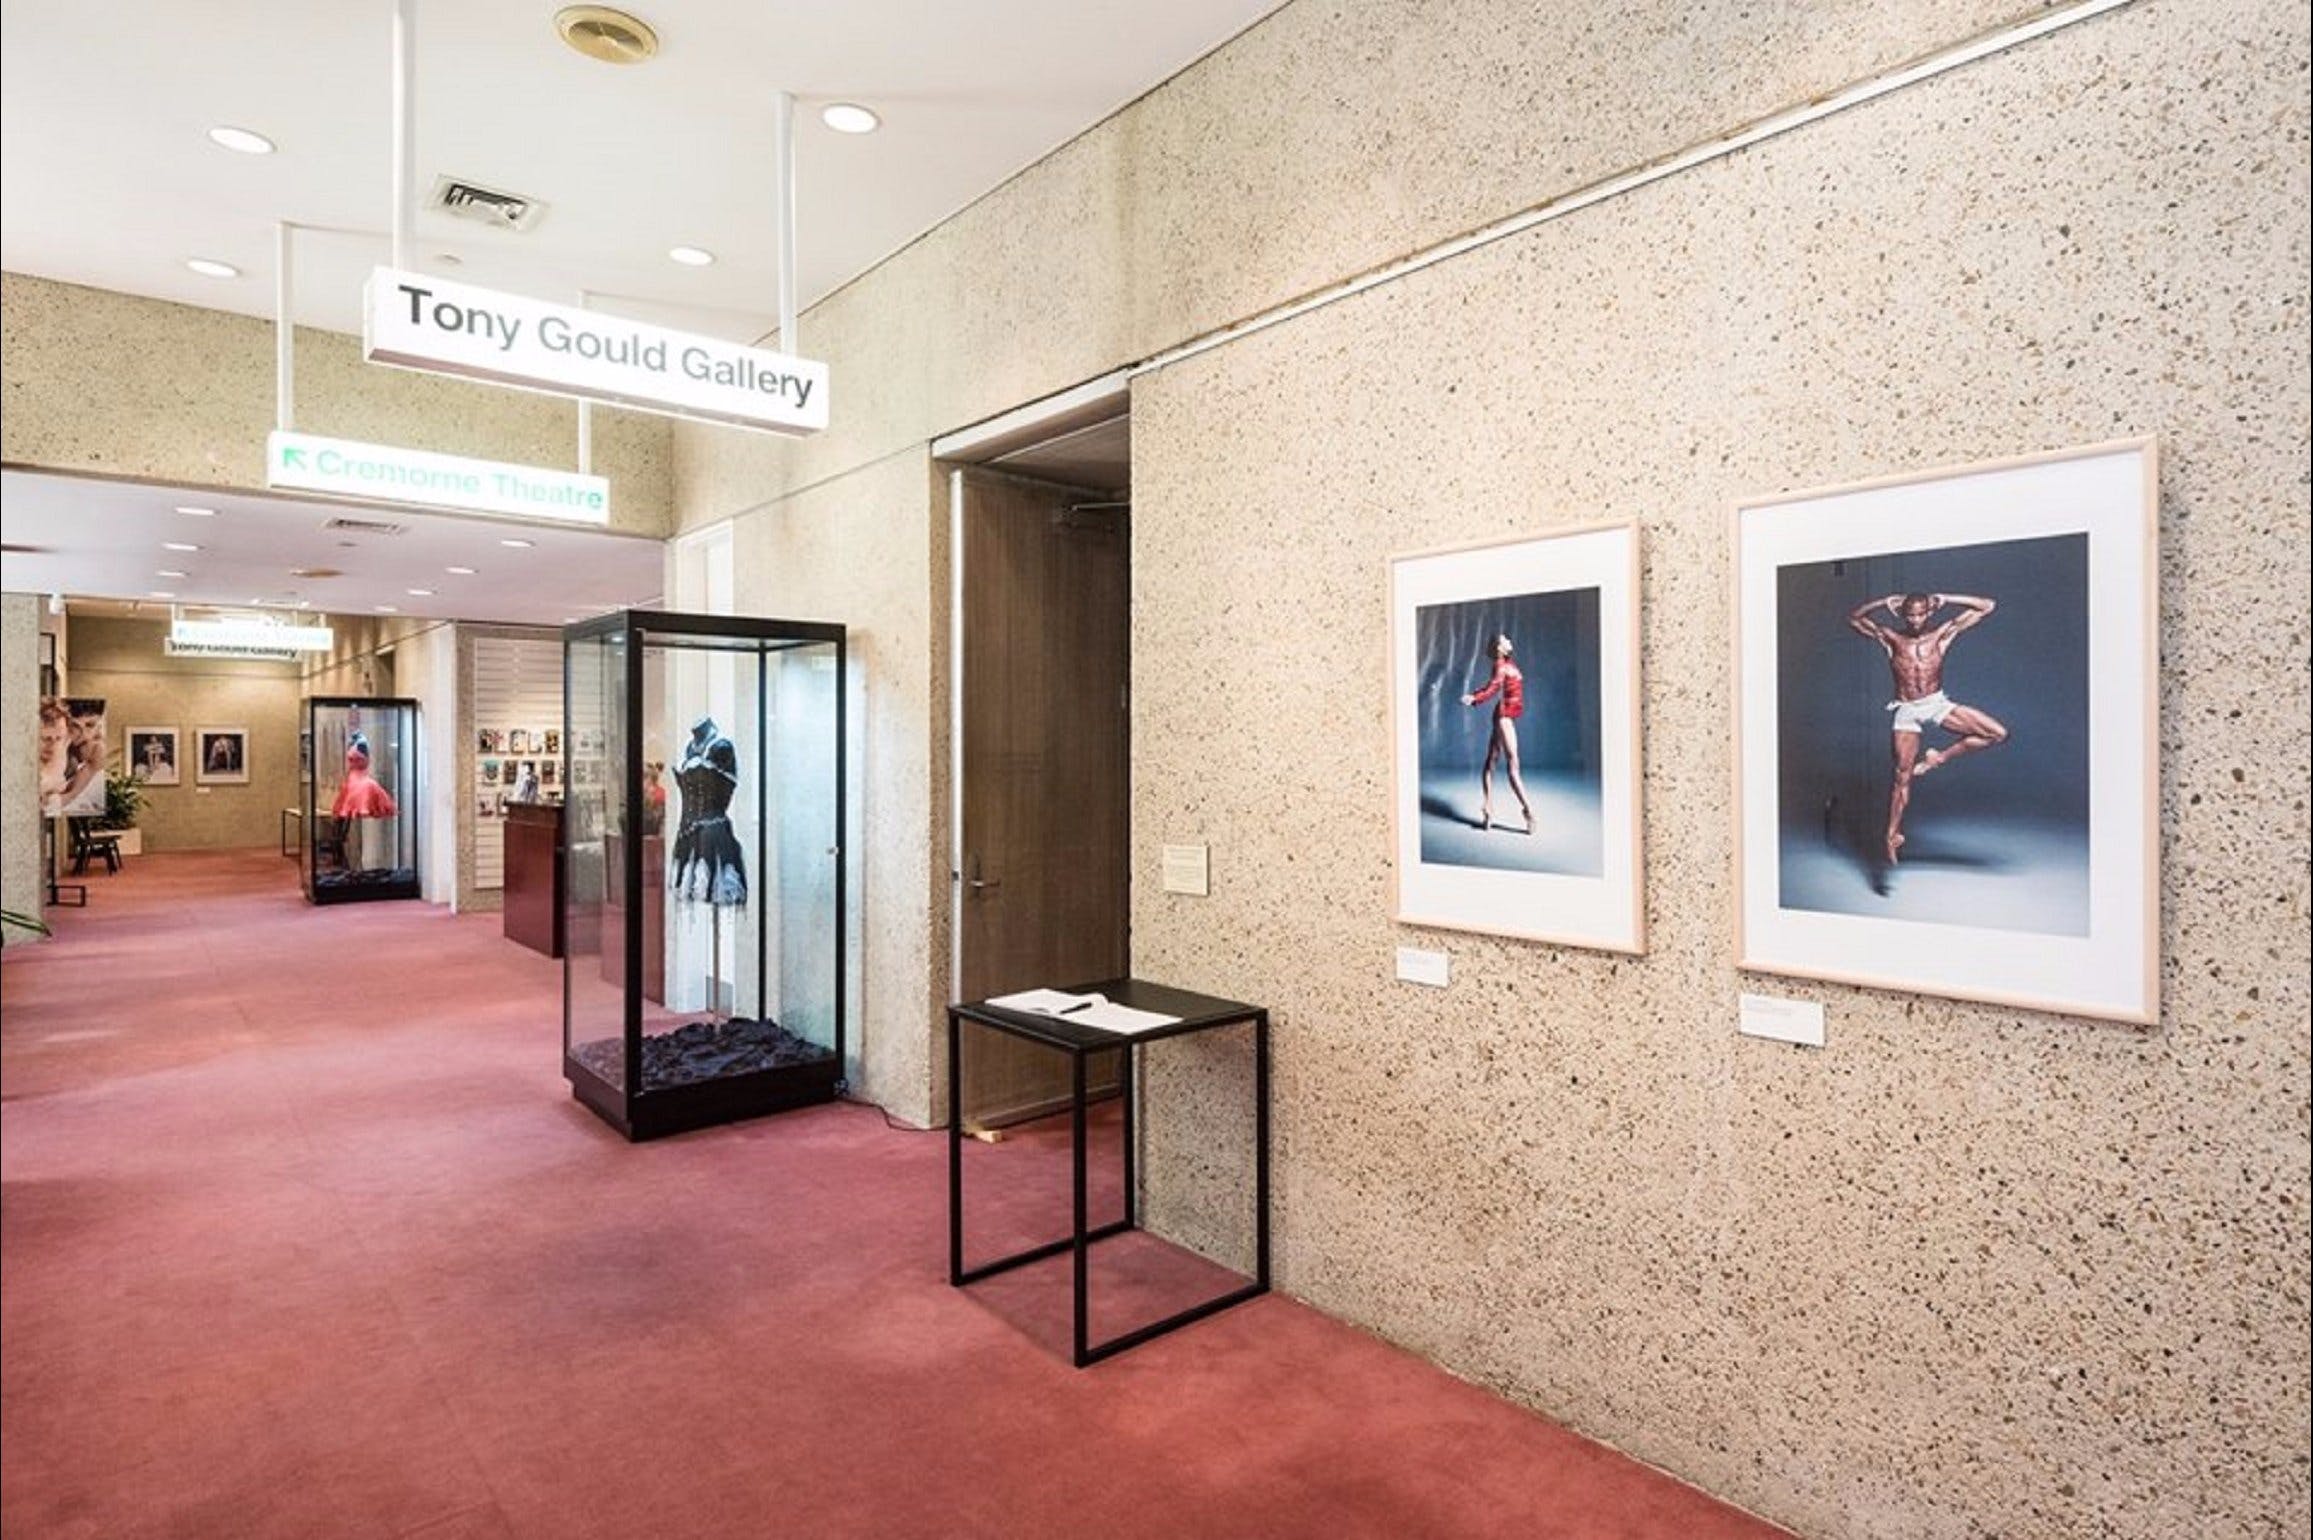 Tony Gould Gallery - Accommodation Directory